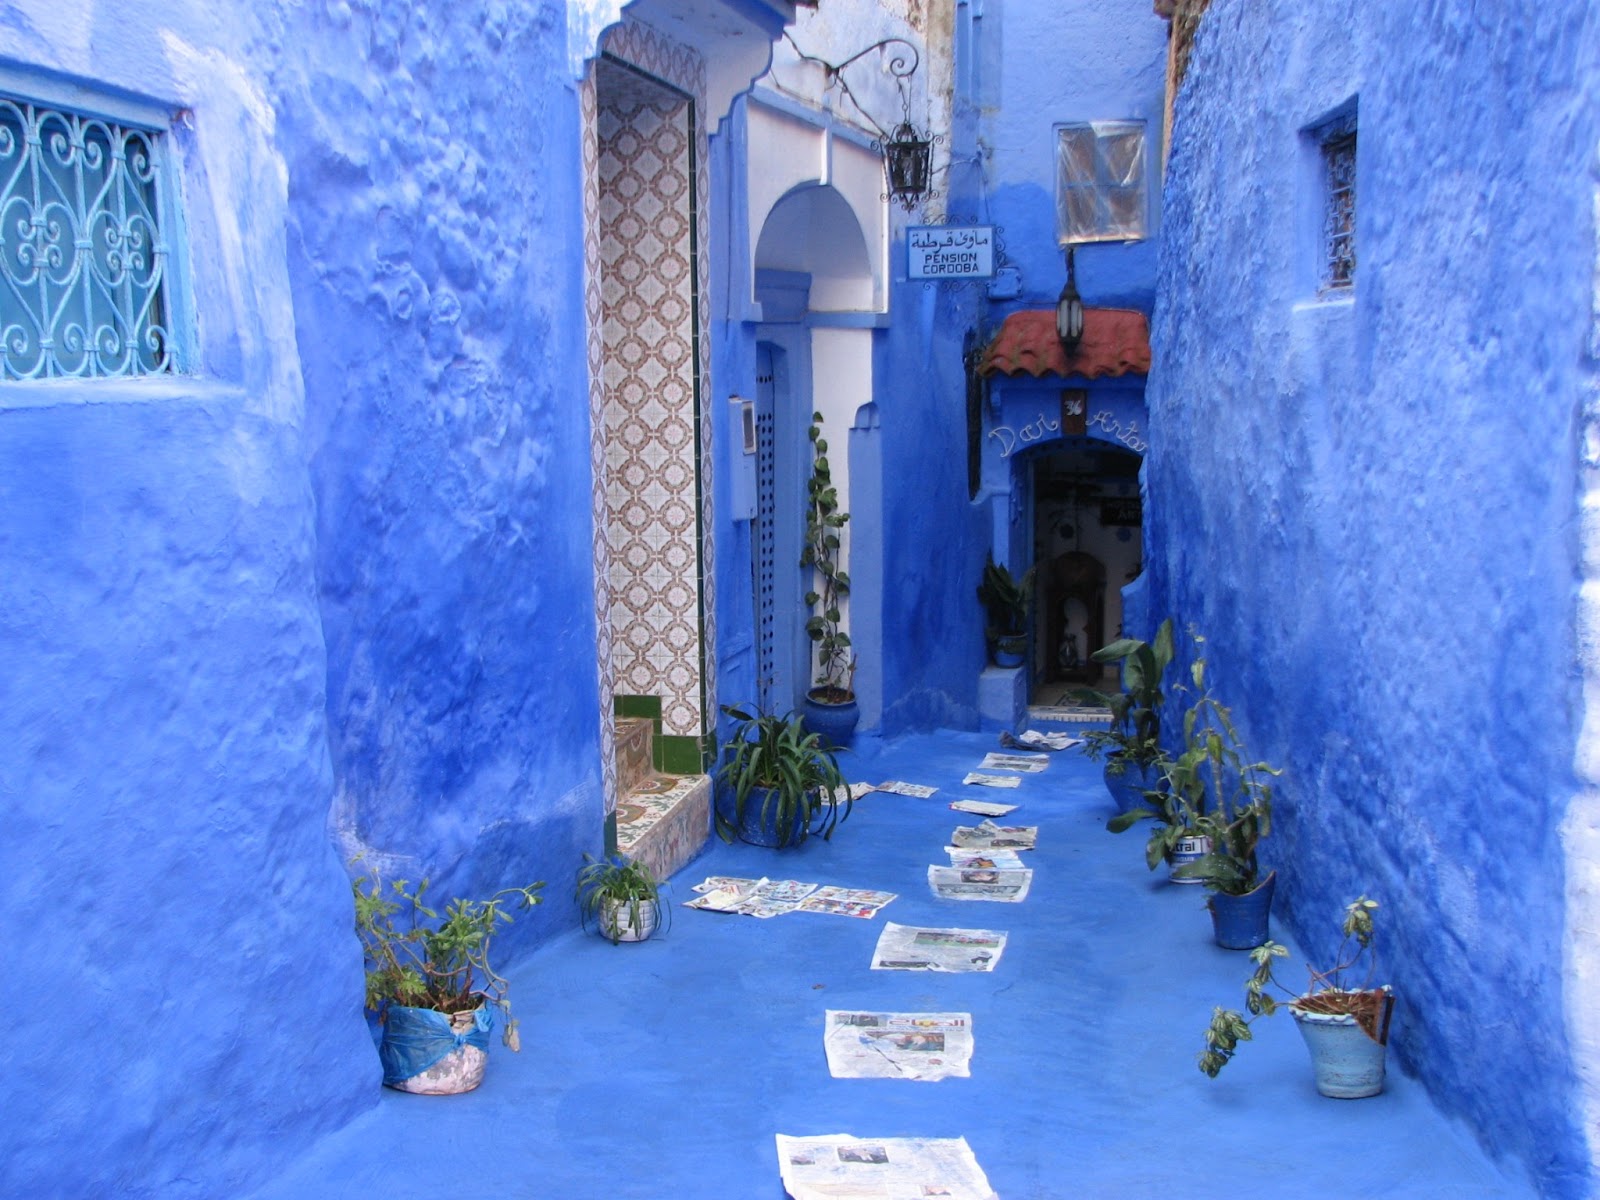 7 Days Tour From Tangier To Marrakeh Via Chefchaouen, Fes